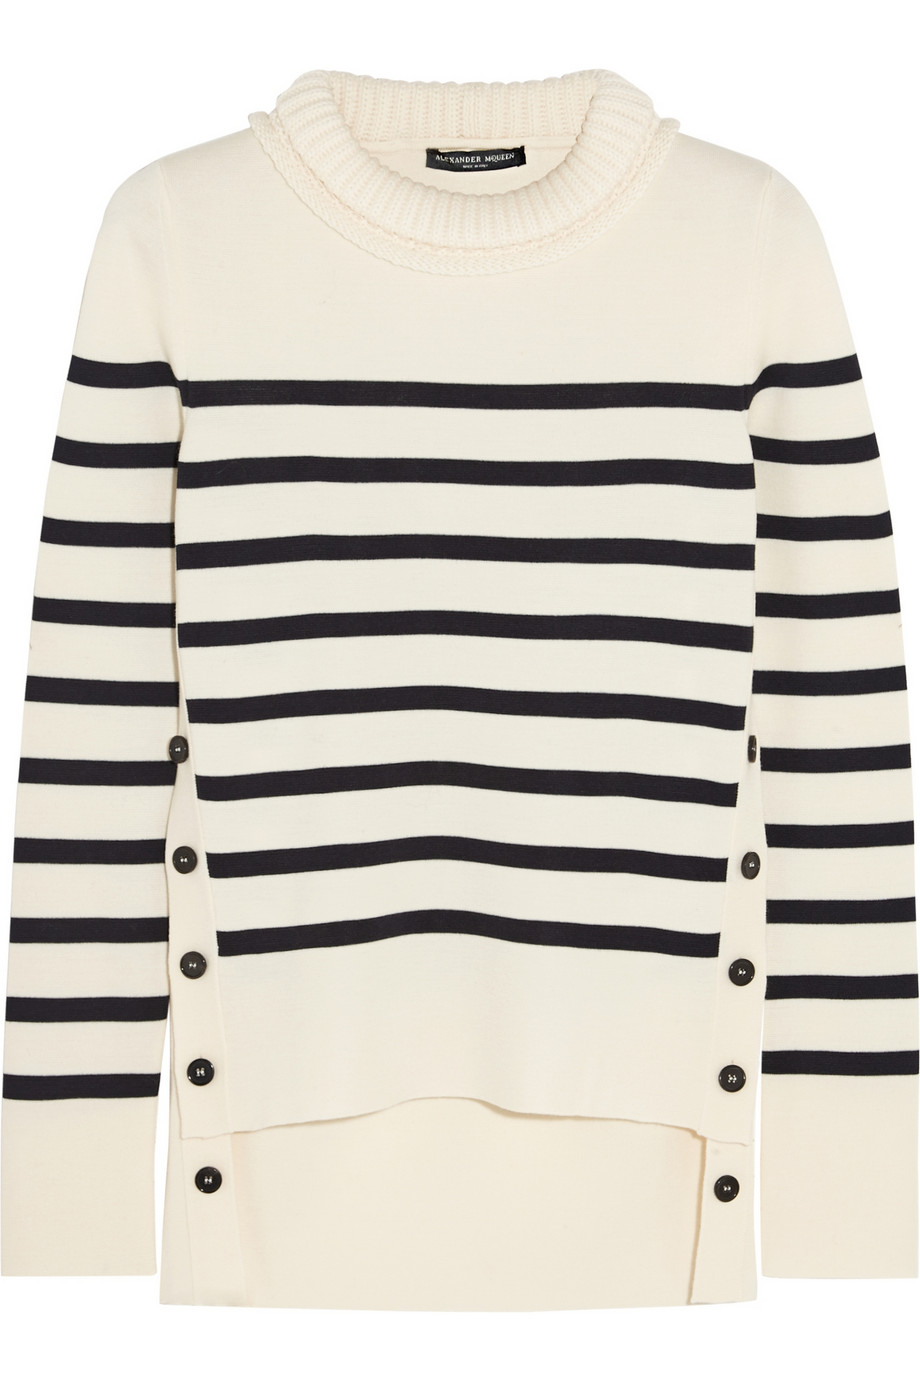 Shopping: Striped Sweaters & Perfect Totes